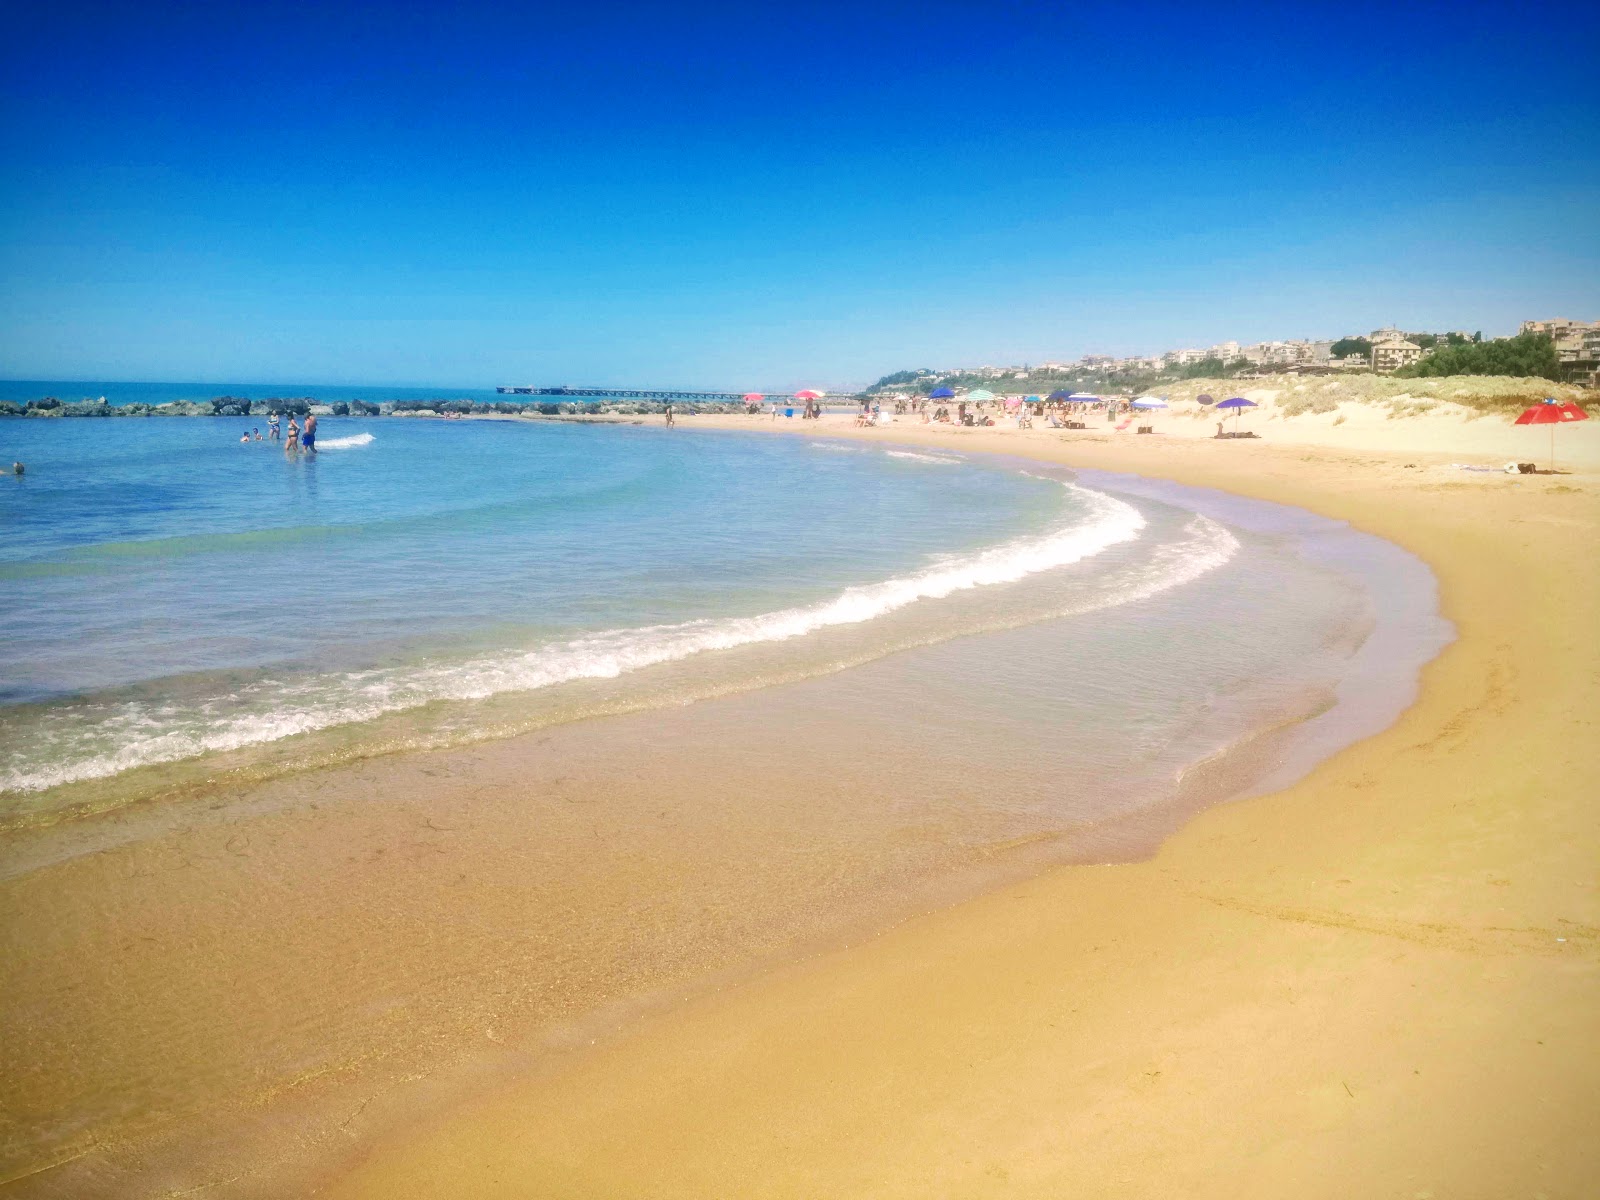 Photo of Spiaggia Di Gela - popular place among relax connoisseurs